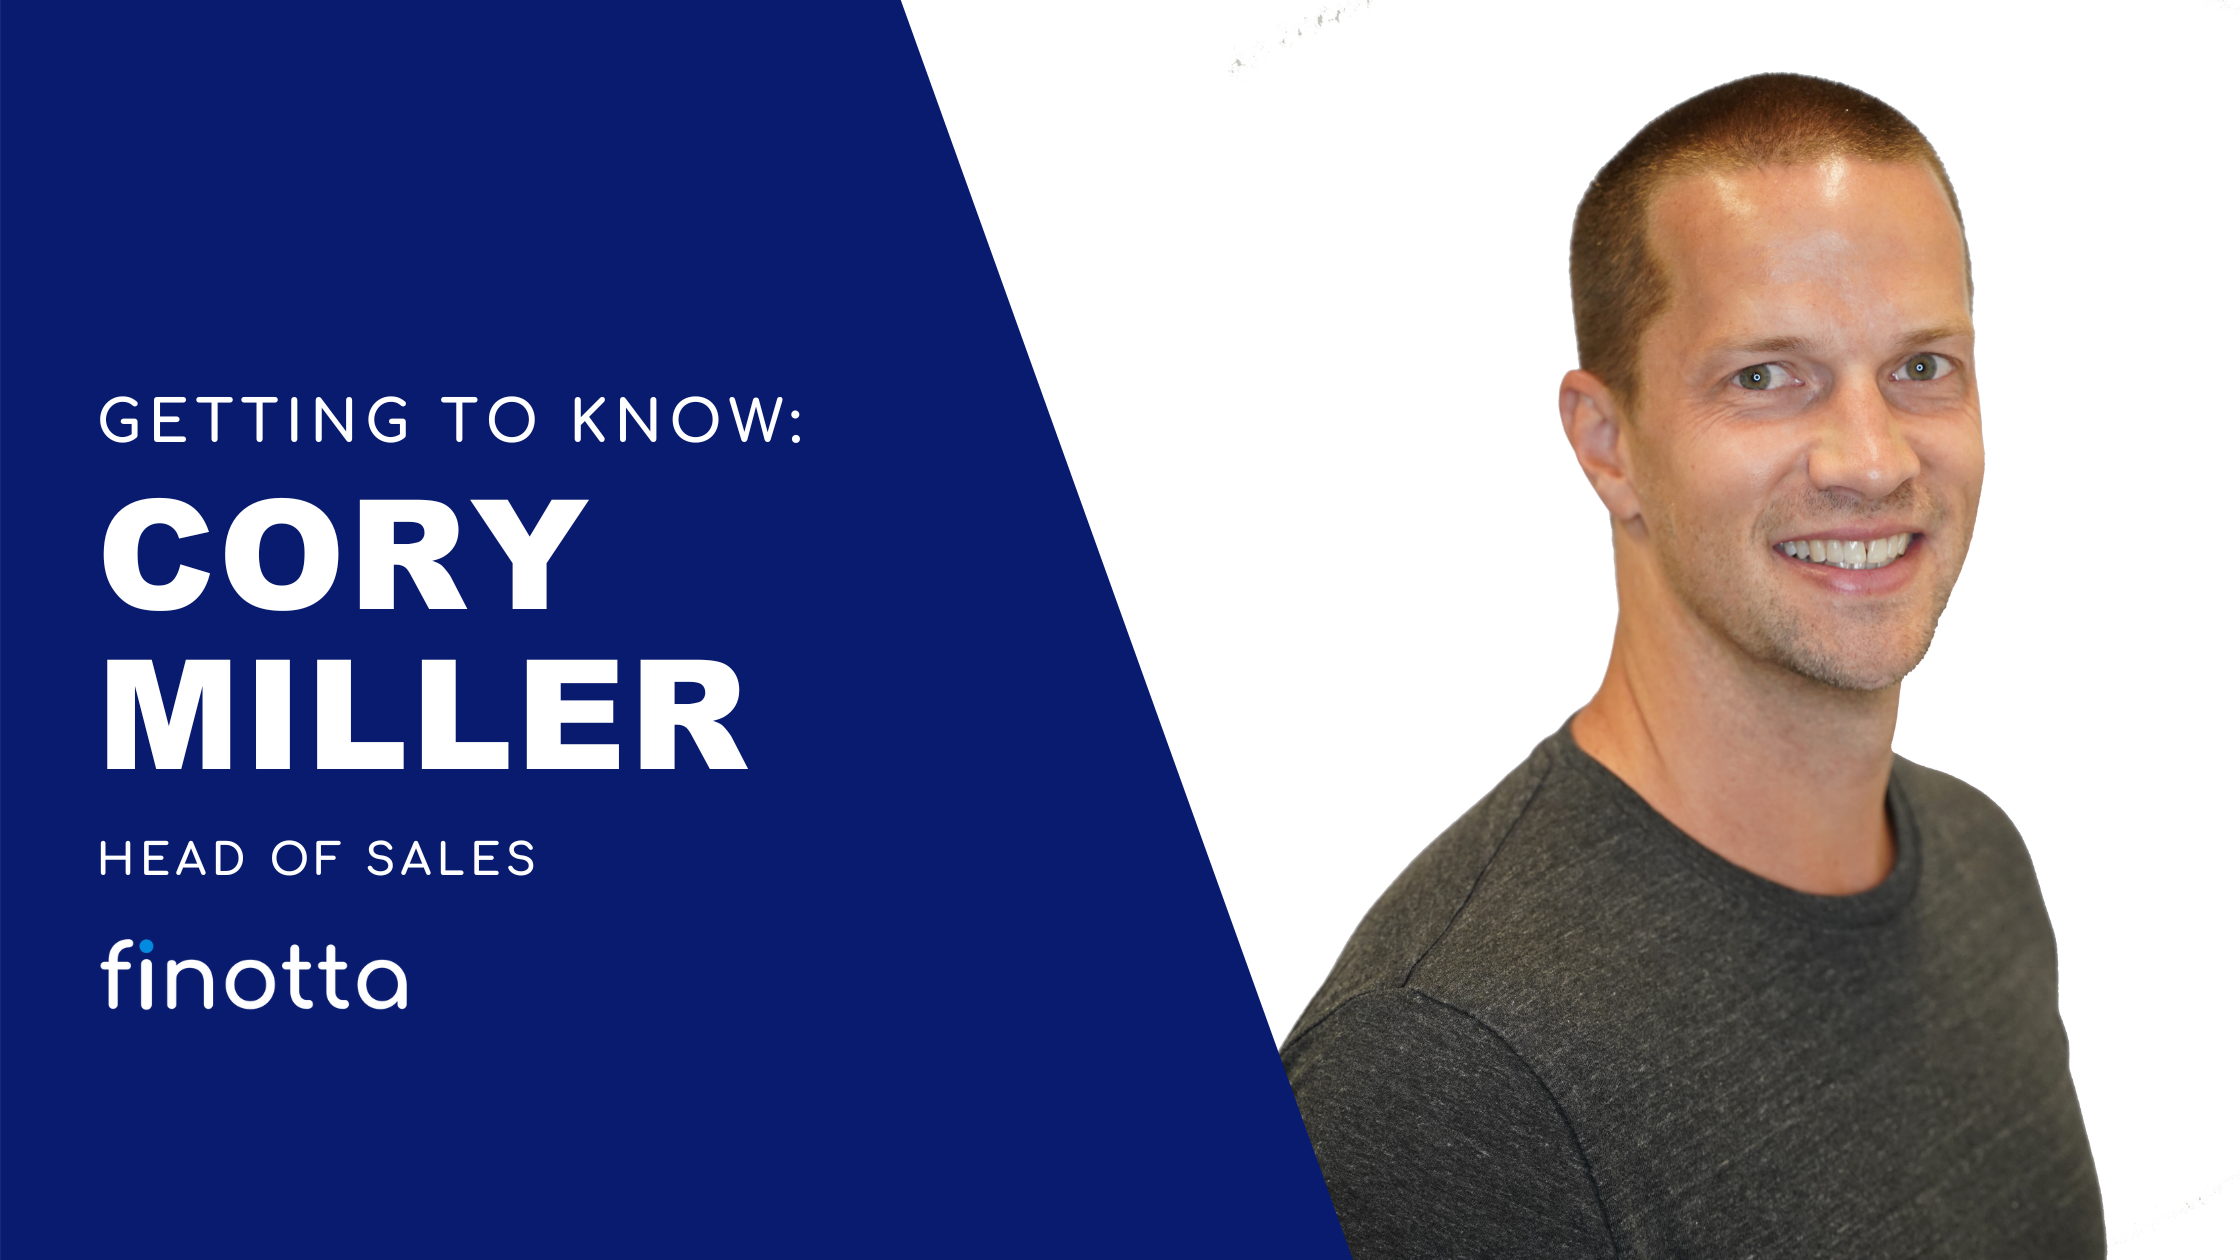 Getting to Know: Cory Miller, Head of Sales